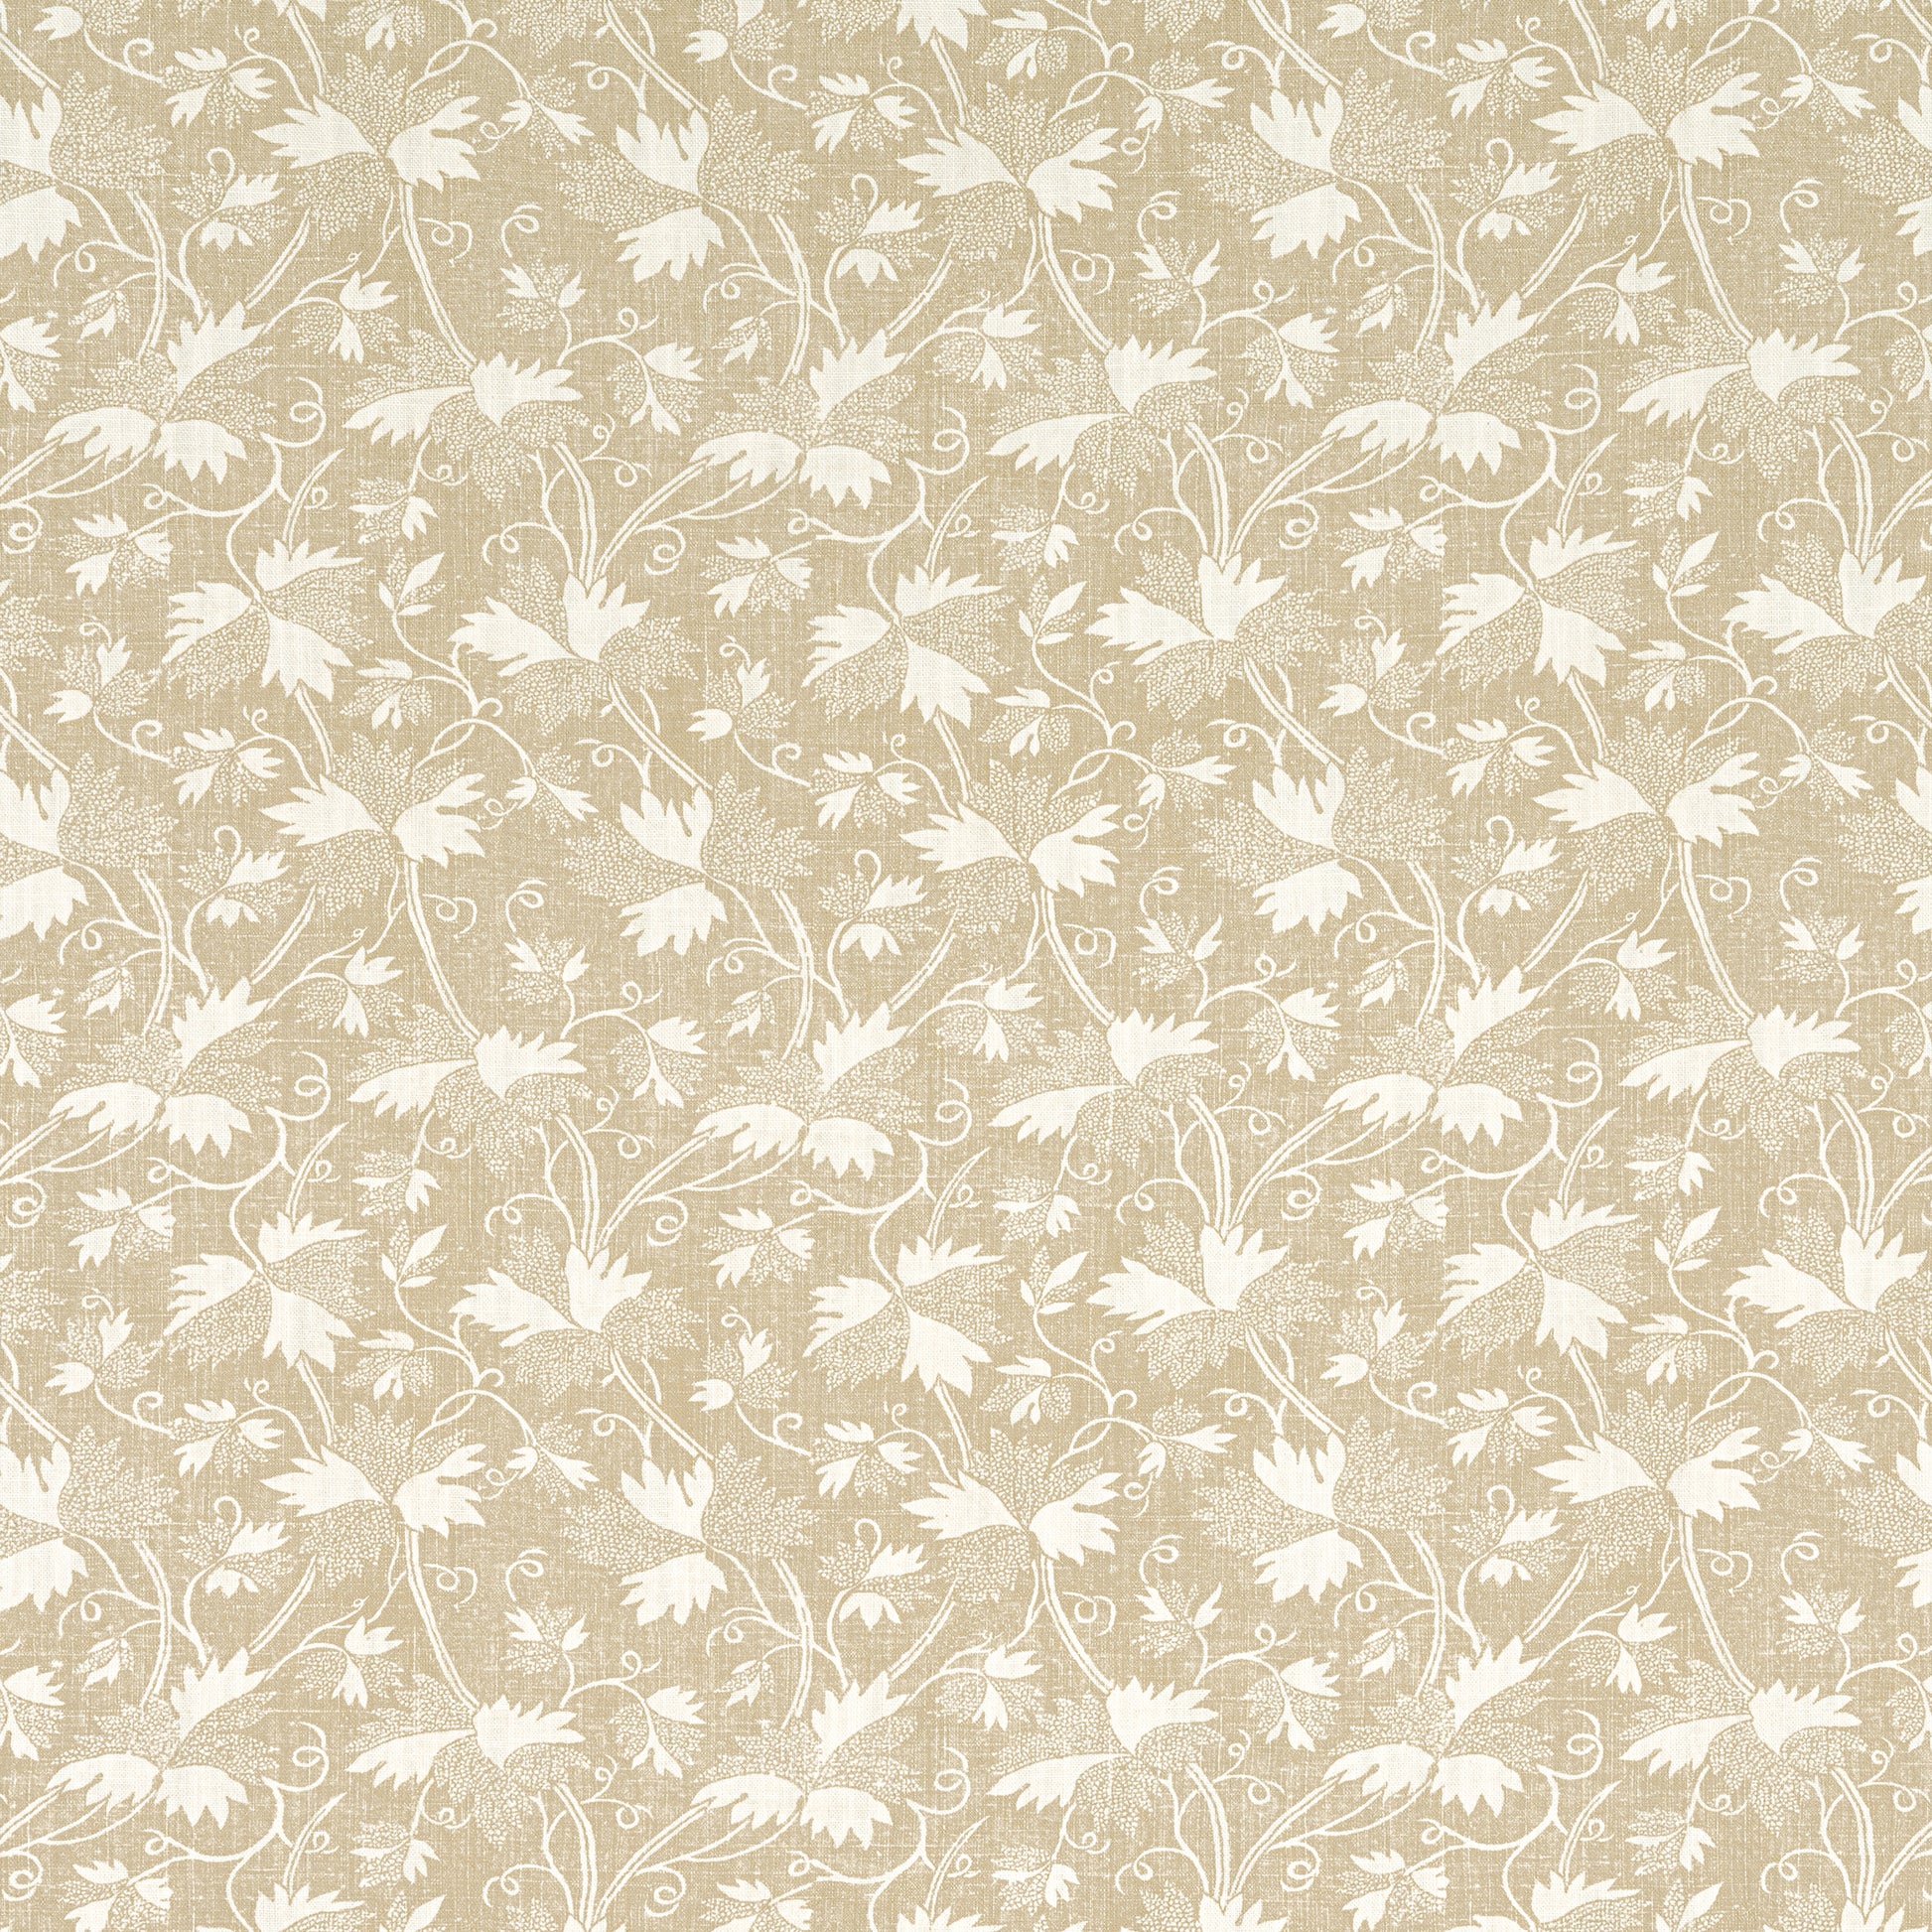 Purchase Thibaut Fabric SKU F936436 pattern name Chester color Beige